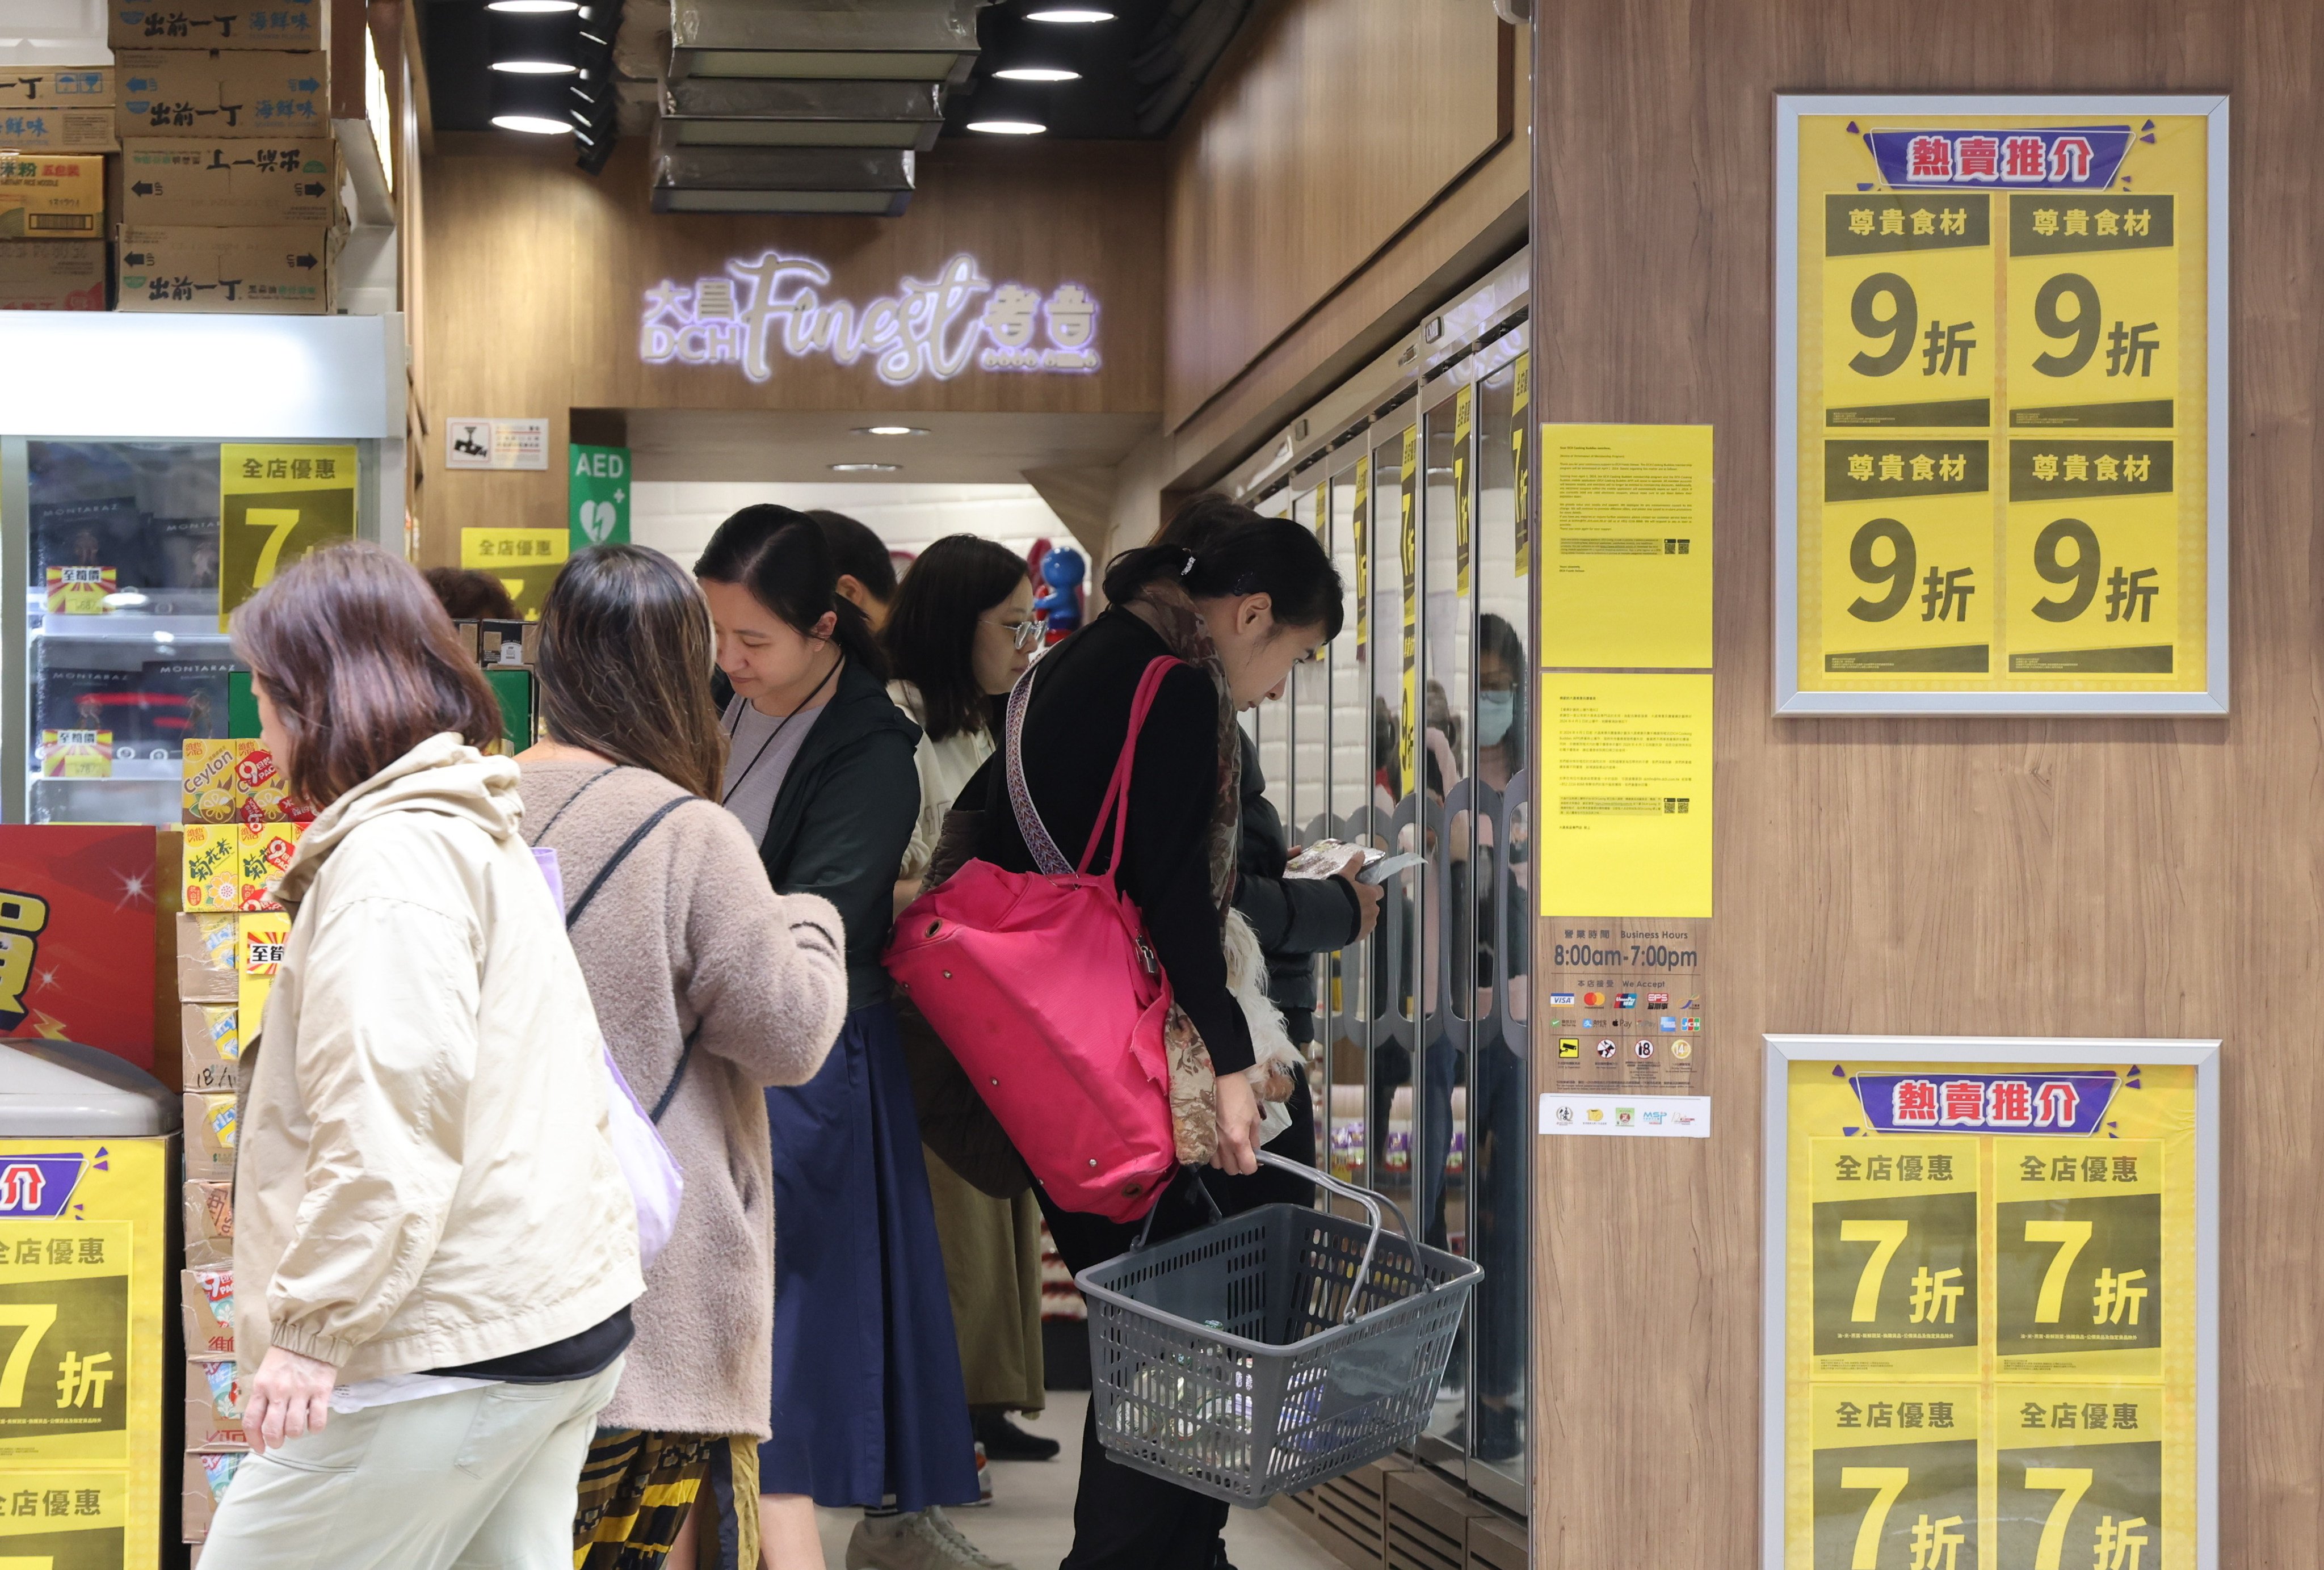 Shoppers stock up at one of DCH’s stores. The retailer was established in 1985 and provides frozen foods, seafood, meat and poultry, among other goods. Photo: Jelly Tse